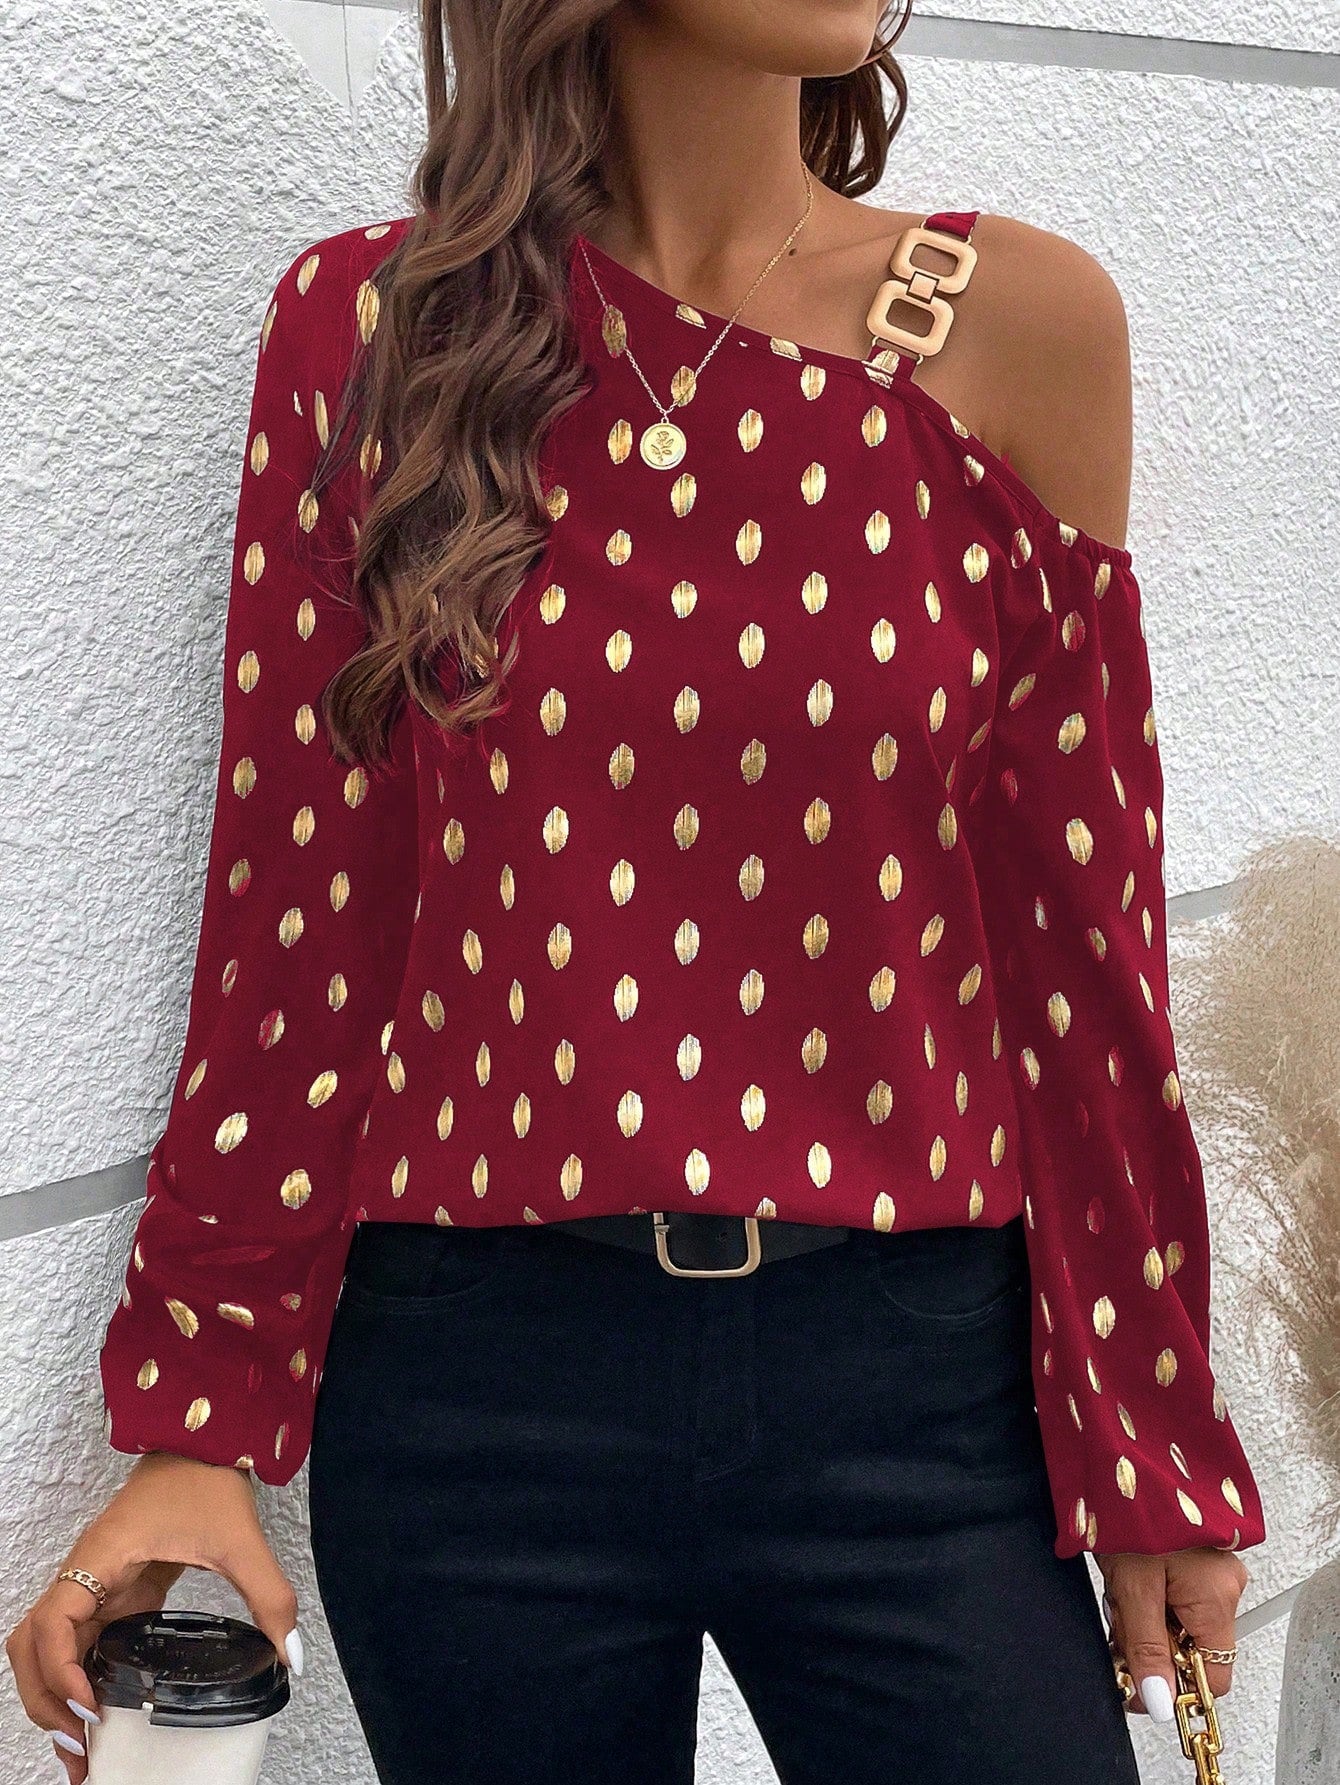 LUNE All Over Printed Chain Pattern Irregular Collar Button Down Shirt